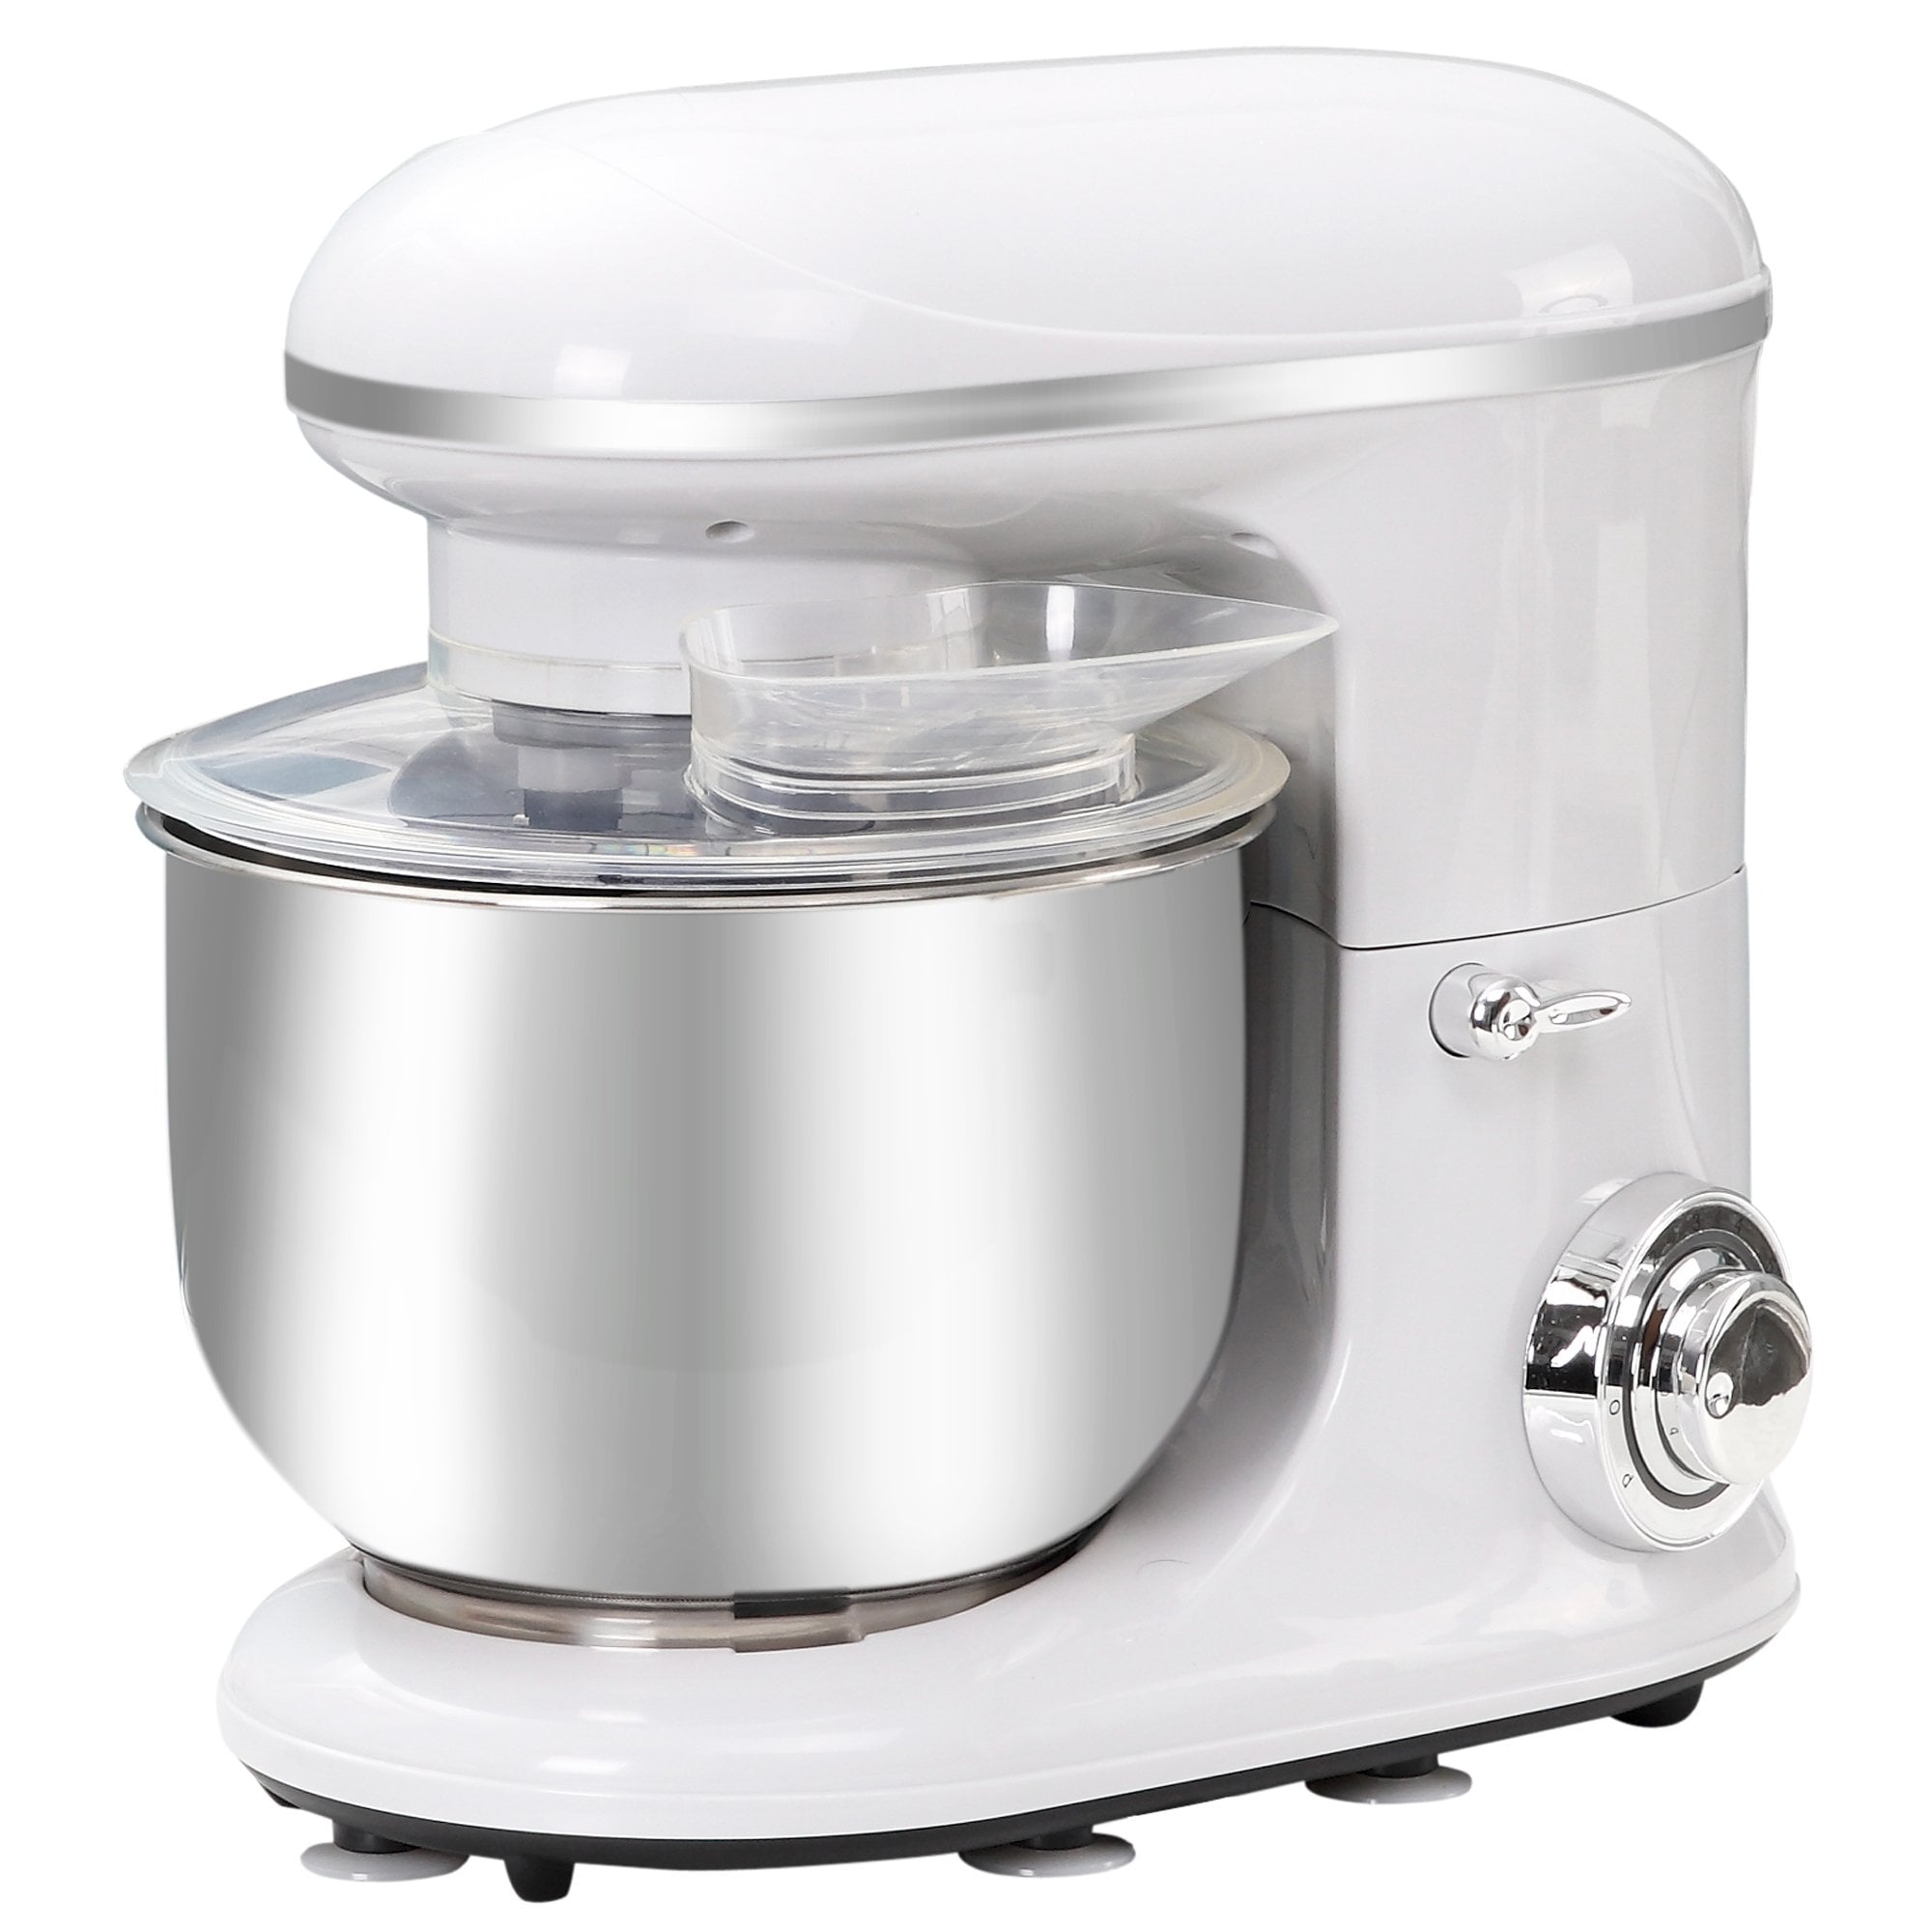 HOMCOM Stand Mixer - White with 6 Speeds and Pulse Setting, 1200W 5.5L Tilt Head Electric Cake Mixer with Stainless Bowl, Beater, Dough Hook and Whisk, Dishwasher Safe, Silver w/ Speed Setting